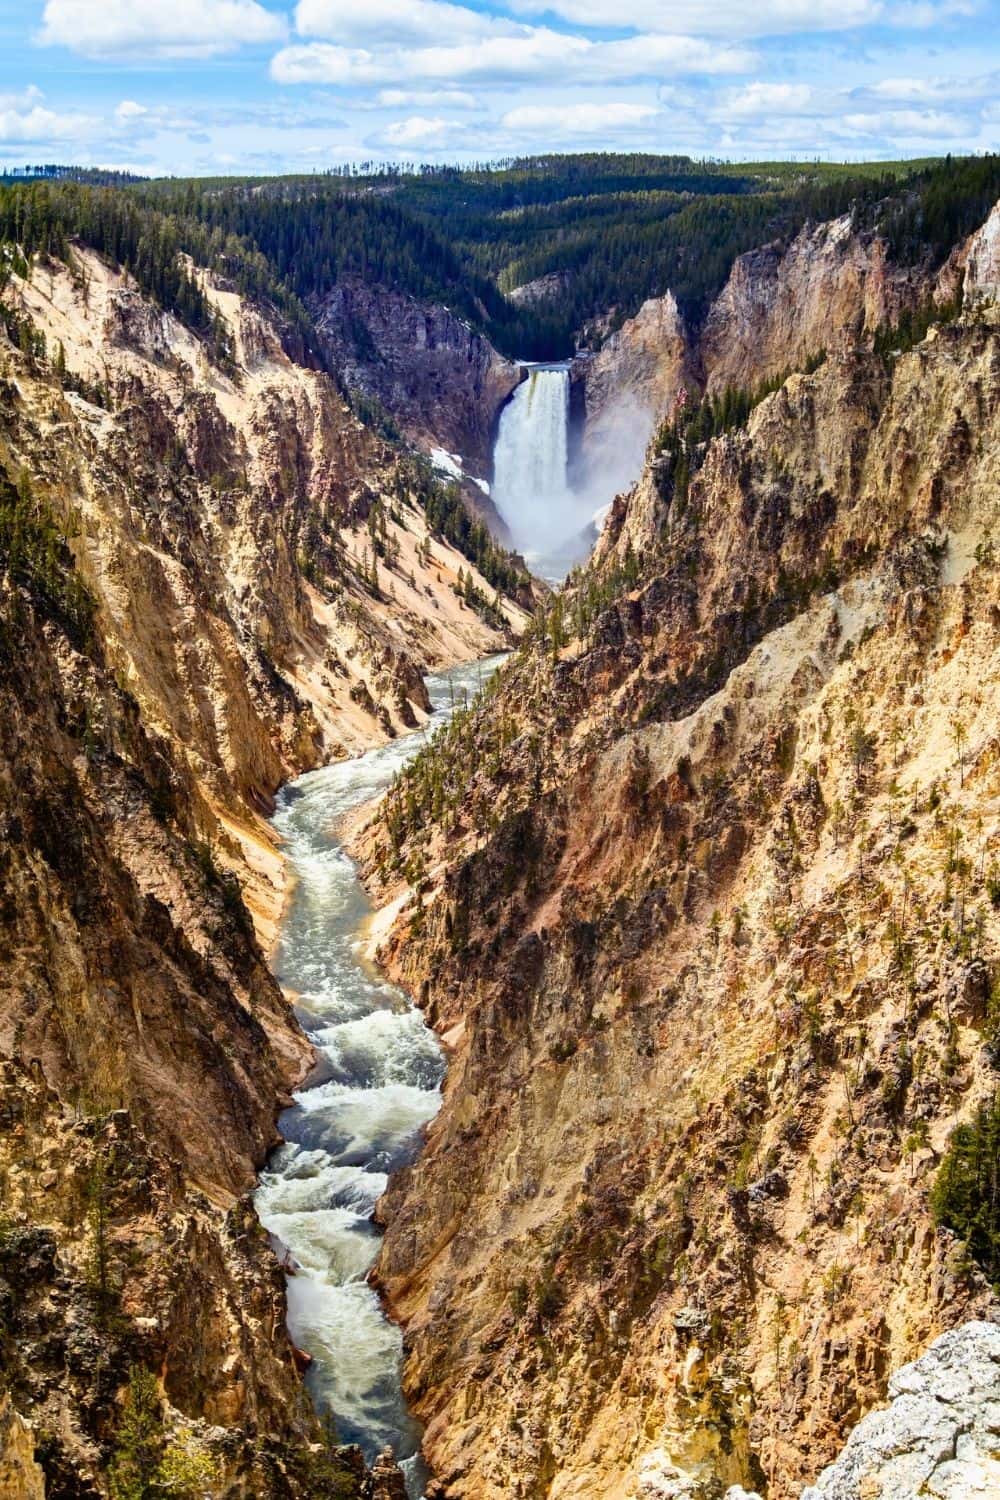 View from the Artists Point in the Grand Canyon of the Yellowstone